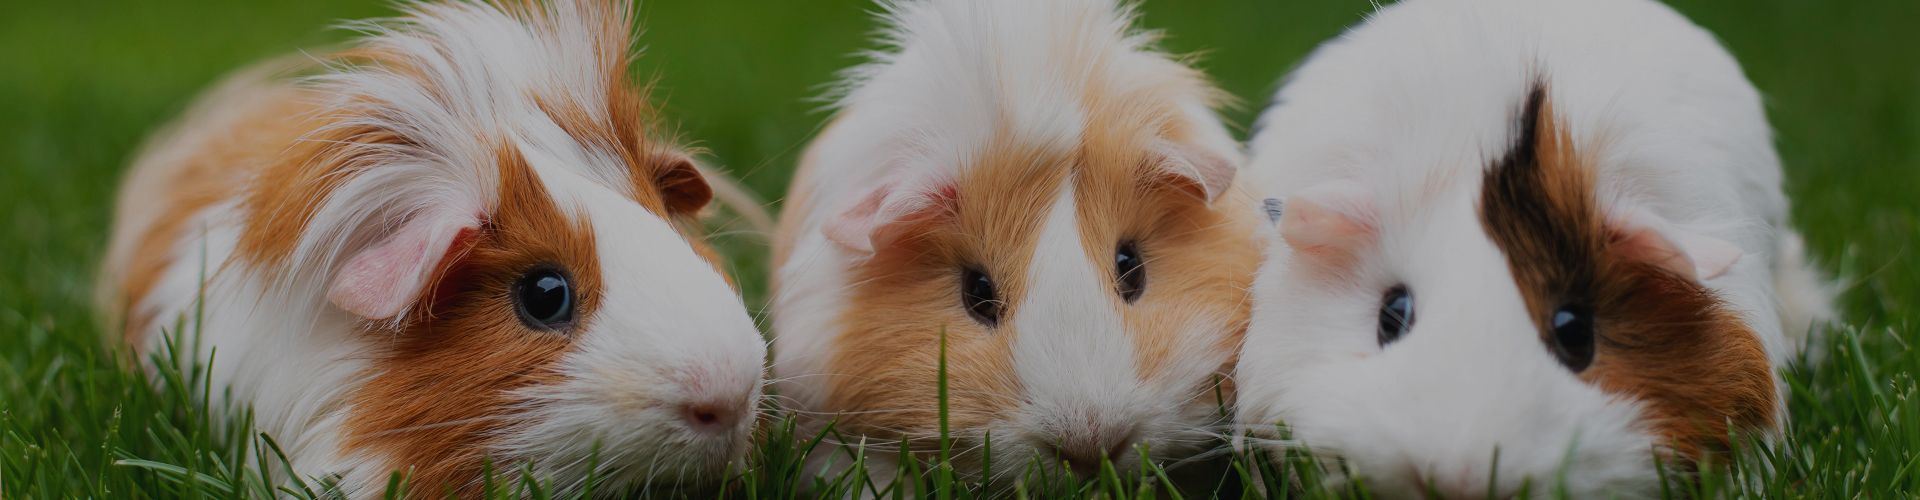 3 guinea pigs in the grass